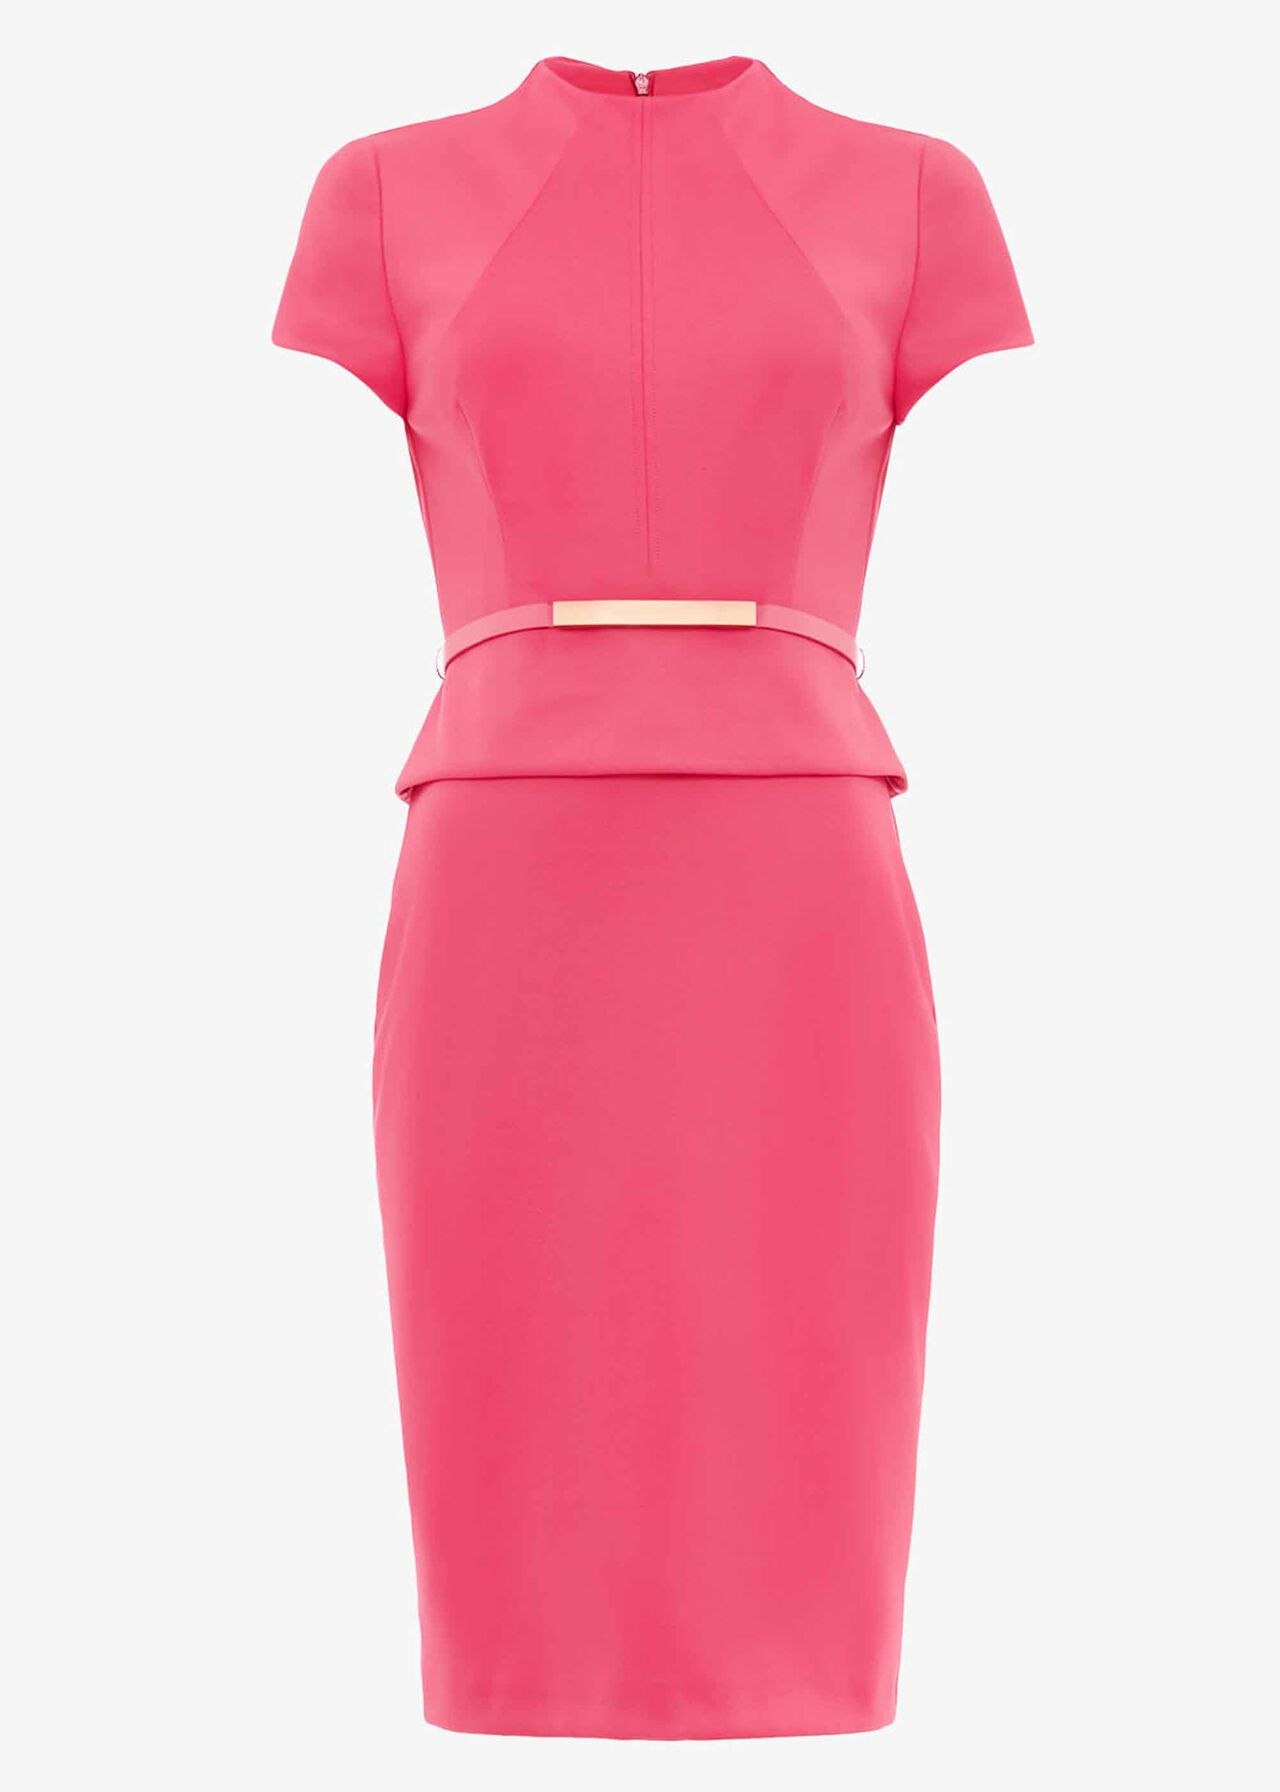 Darcy Belted Dress